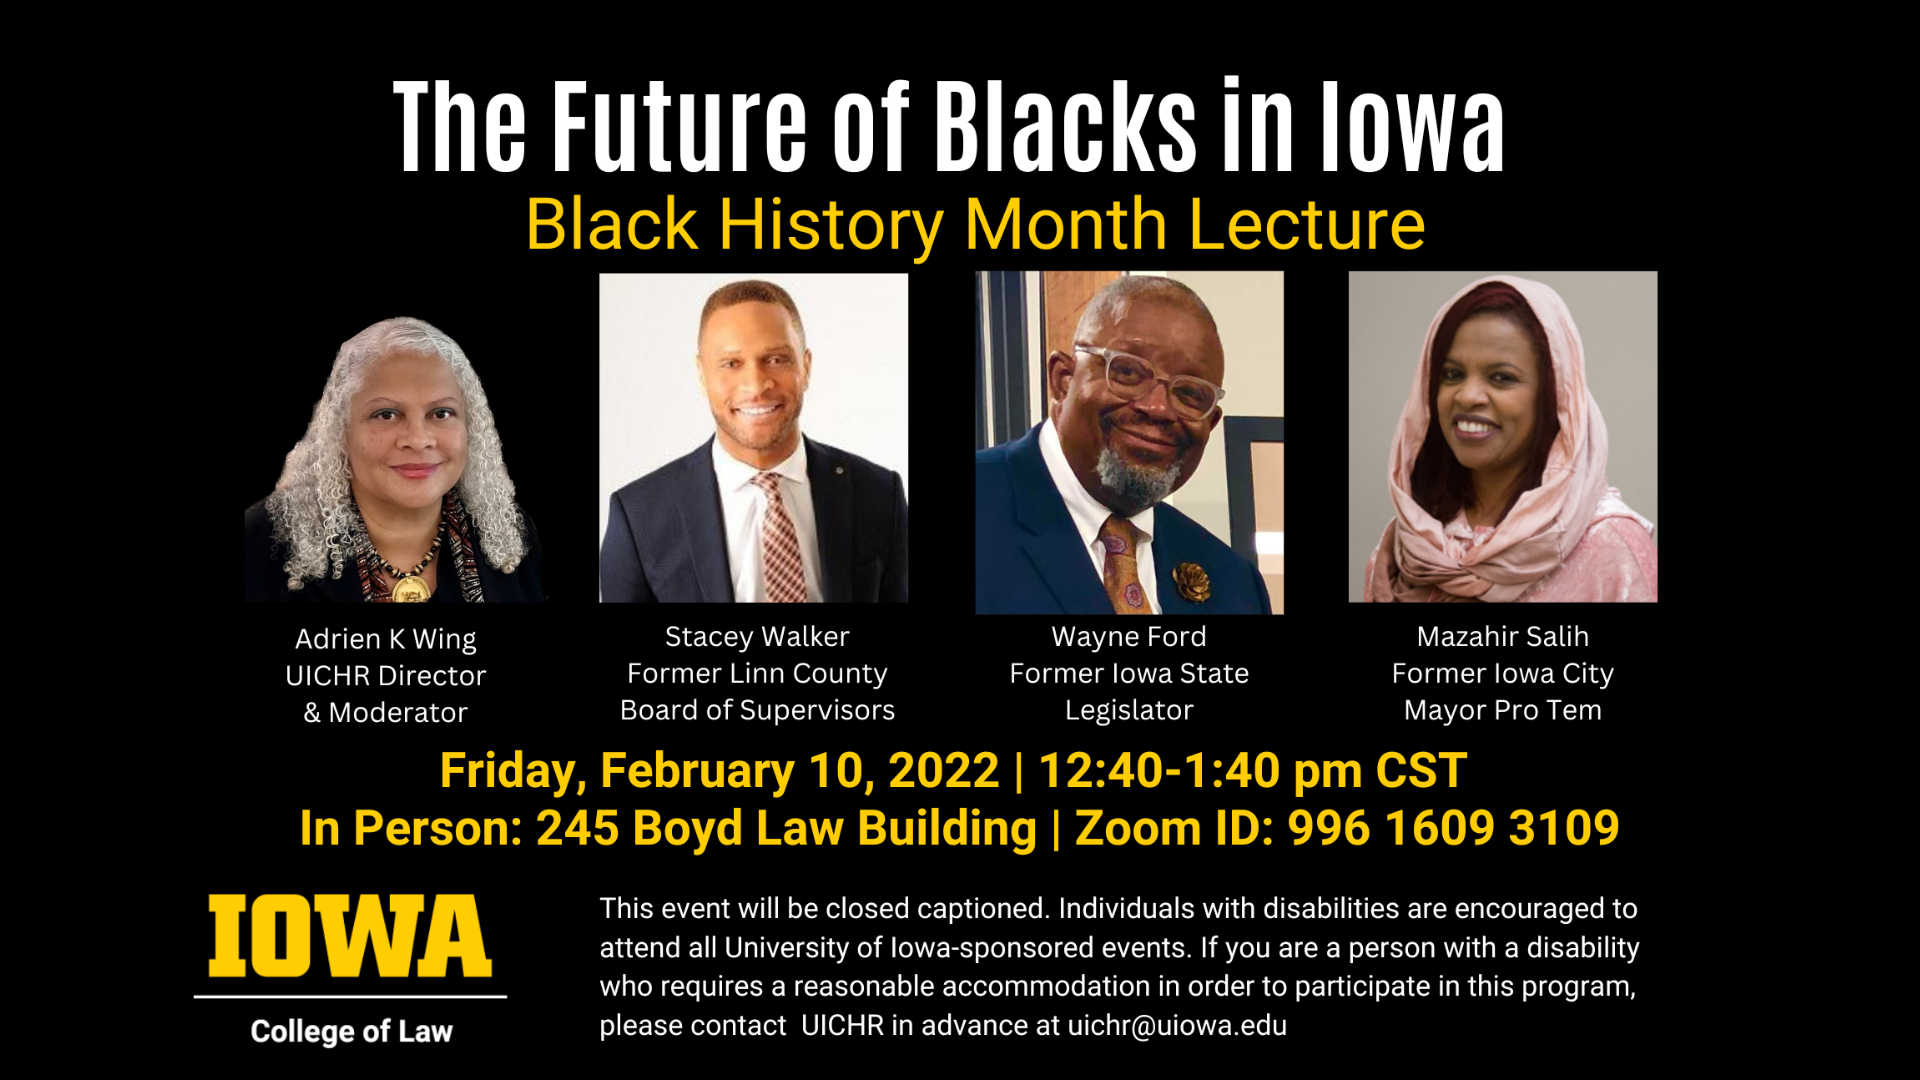 The Future of Blacks in Iowa: Black History Month Lecture. Friday, Feb 10, 2023